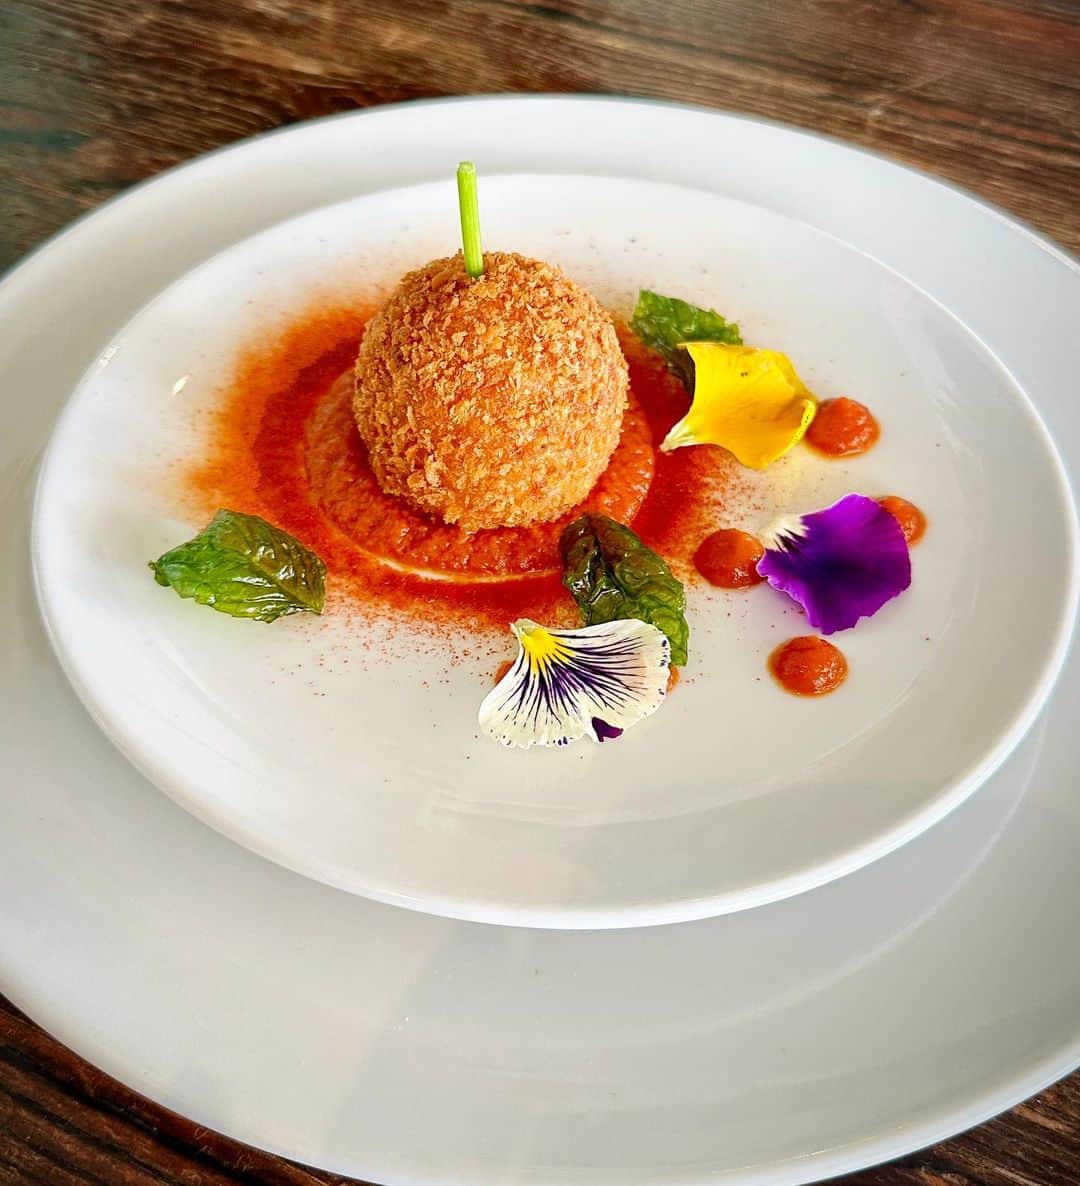 Arancino at The Kahalaさんのインスタグラム写真 - (Arancino at The KahalaInstagram)「🥂🎉🇮🇹 HAPPY 10th ANNIVERSARY @arancinokahala featuring a special 6 Course Anniversary Menu ($120) showcasing some of our iconic dishes from the decade!   In addition, we are bringing back our original PIZZA CARBONARA which we have all missed very much! Once you try it, you’ll be hooked!  We’re so excited to share this beautiful culinary journey down memory lane with you!  RESERVATIONS (808) 380-4400 www.arancino.com  Building upon a reputation of our warm Arancino hospitality, distinguished service and quality of food, we are humbled and honored to be recognized as one of the best Italian restaurants in Hawaii by our local community and guests from around the world - receiving numerous accolades and recognition over the past 10 years.   We have continued to take great pride and care in everything that we do in hopes to create a truly one-of-a-kind memorable dining experience for all of our guests.  We thank you for your continued support and patronage and look forward to celebrating this special milestone together!  Grazie Mille,  Arancino at The Kahala   #arancinokahala #arancino #arancinoristoranteitaliano #honolulu #anniversary #celebration #kahala #hawaii #アランチーノアットザカハラ #イタリアン #ハワイ #ホノルル #oahu #celebrate #congratulations #congratulazione #celebrazione #happyanniversary #hawaiisbestkitchens #italianrestaurant #italian #kahalahotel #italy #dinner #menu #party 📸: @laughsdarkly」6月30日 15時04分 - arancinokahala